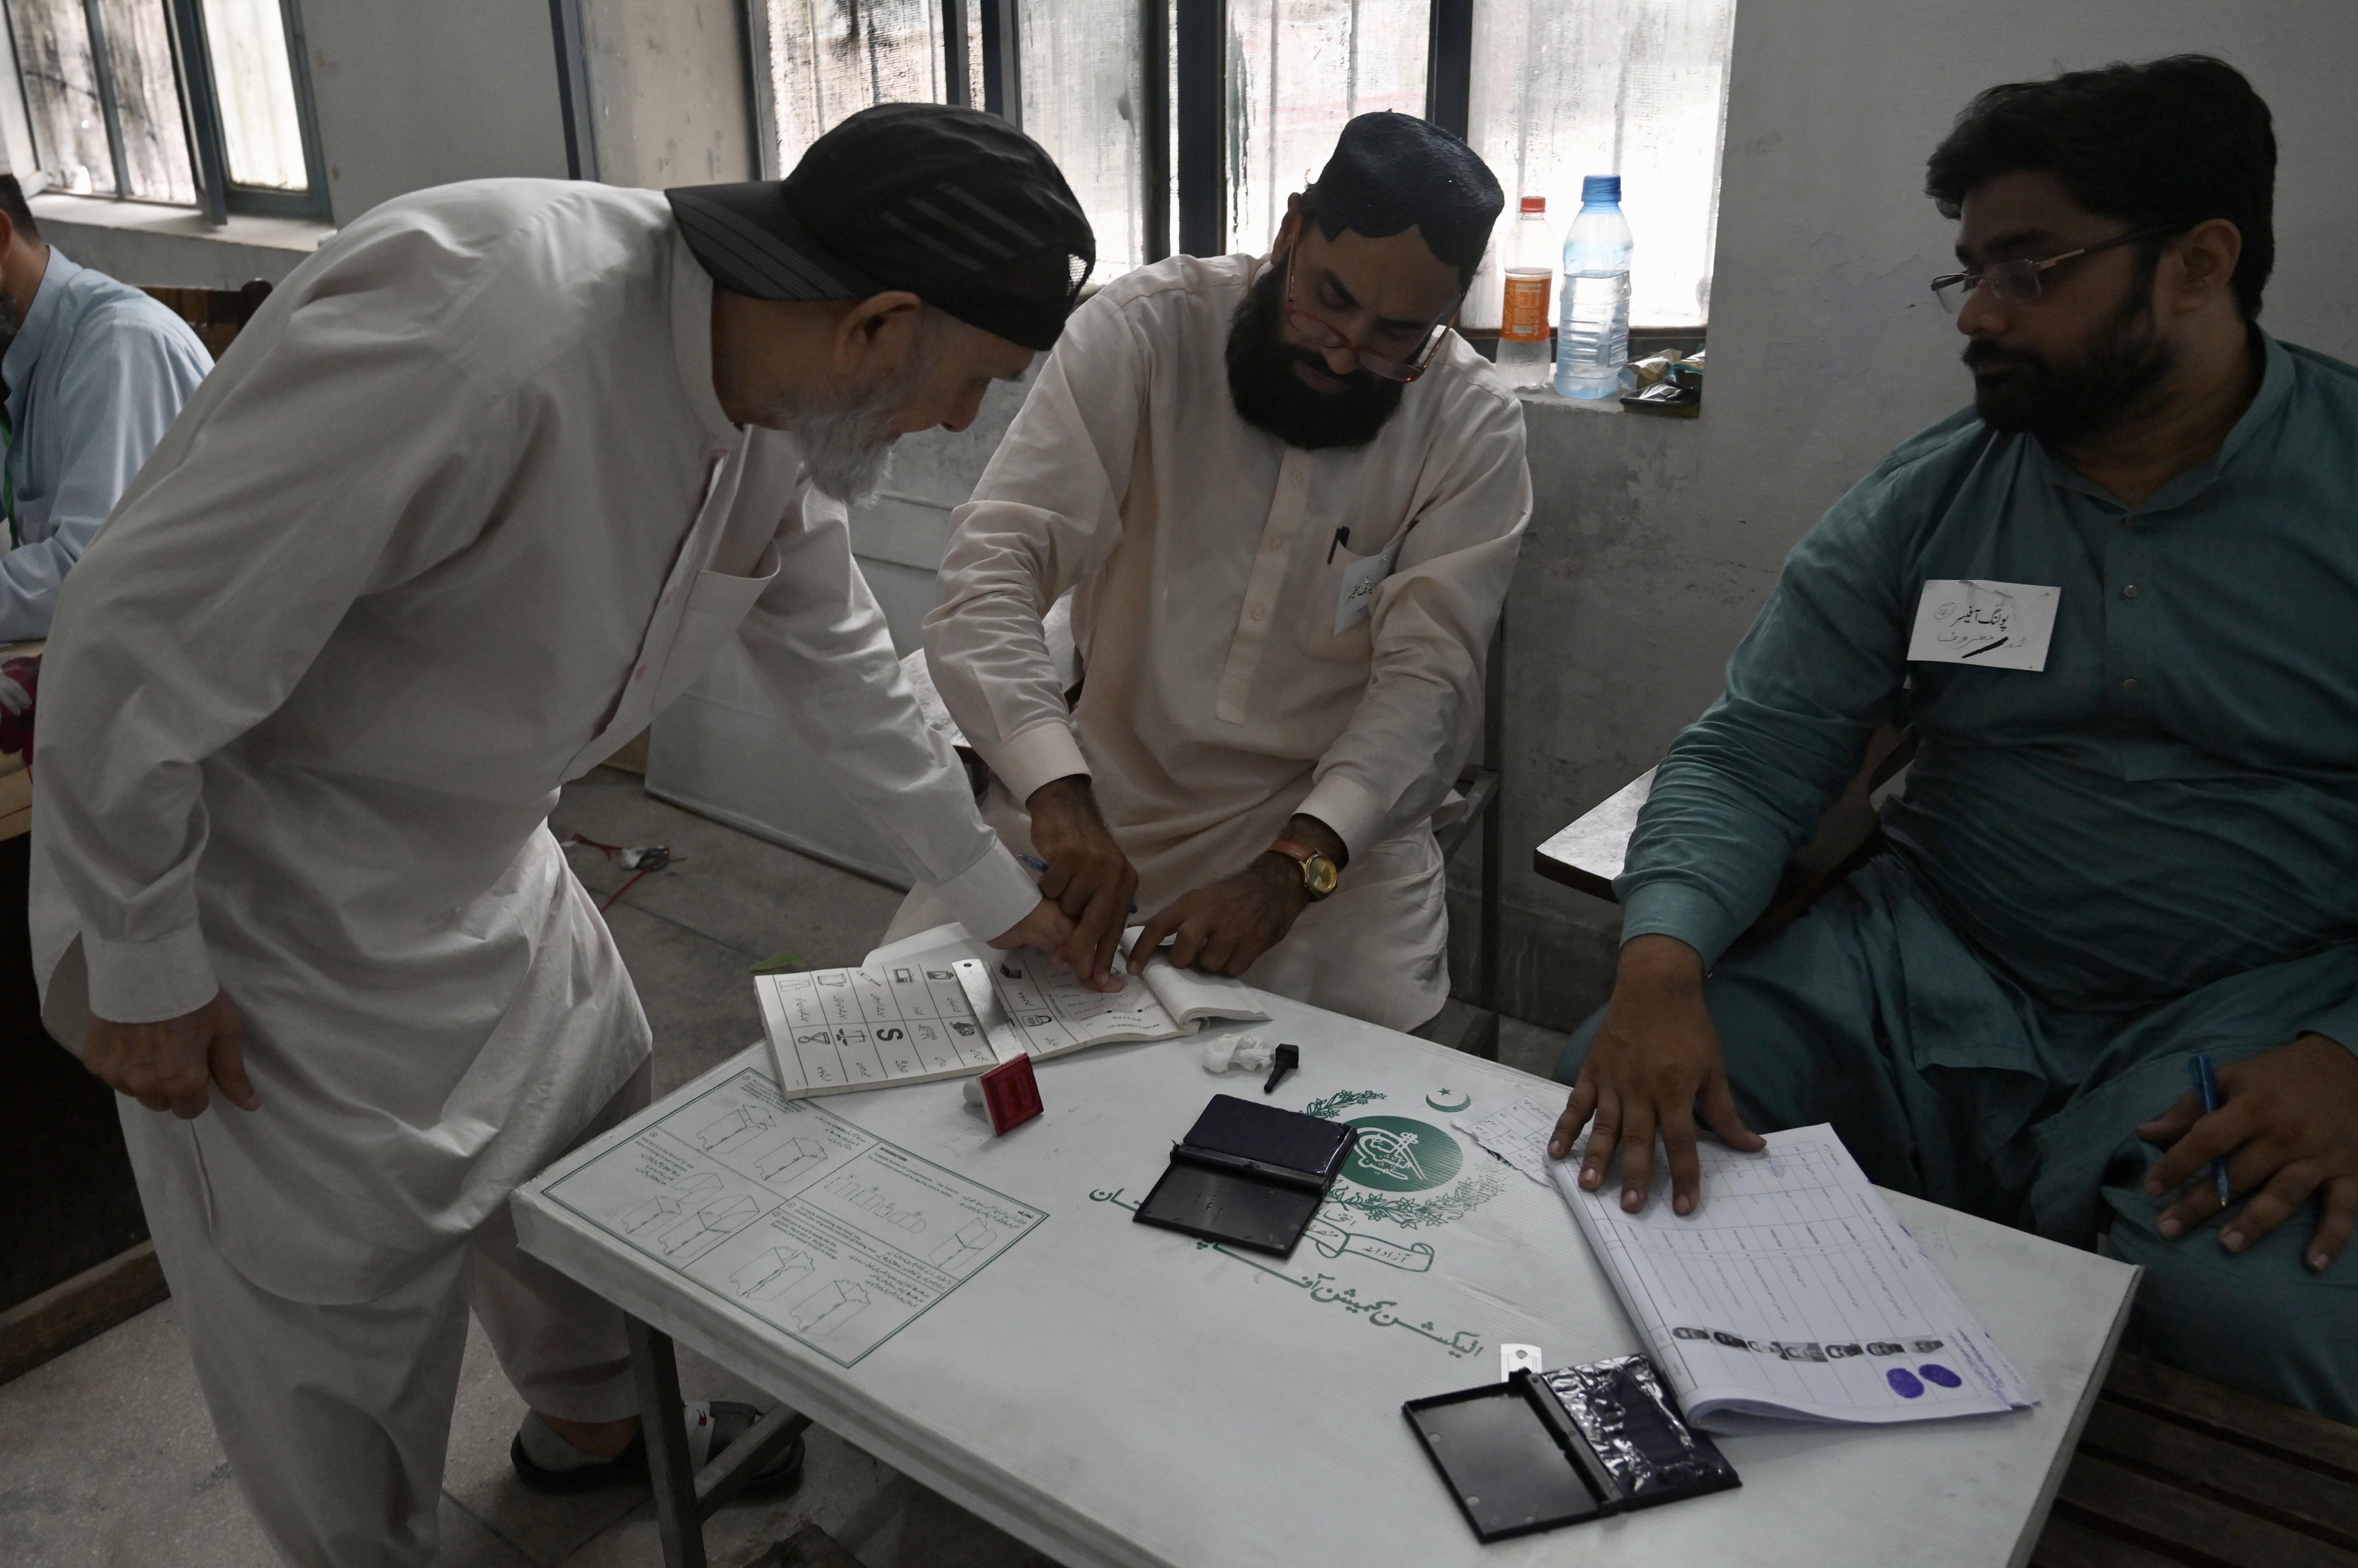 A man casts his vote at a polling station during the elections on 20 provincial assembly seats in the most populous province of Punjab, in Lahore, Pakistan, July 17, 2022. (EPA PHOTO)